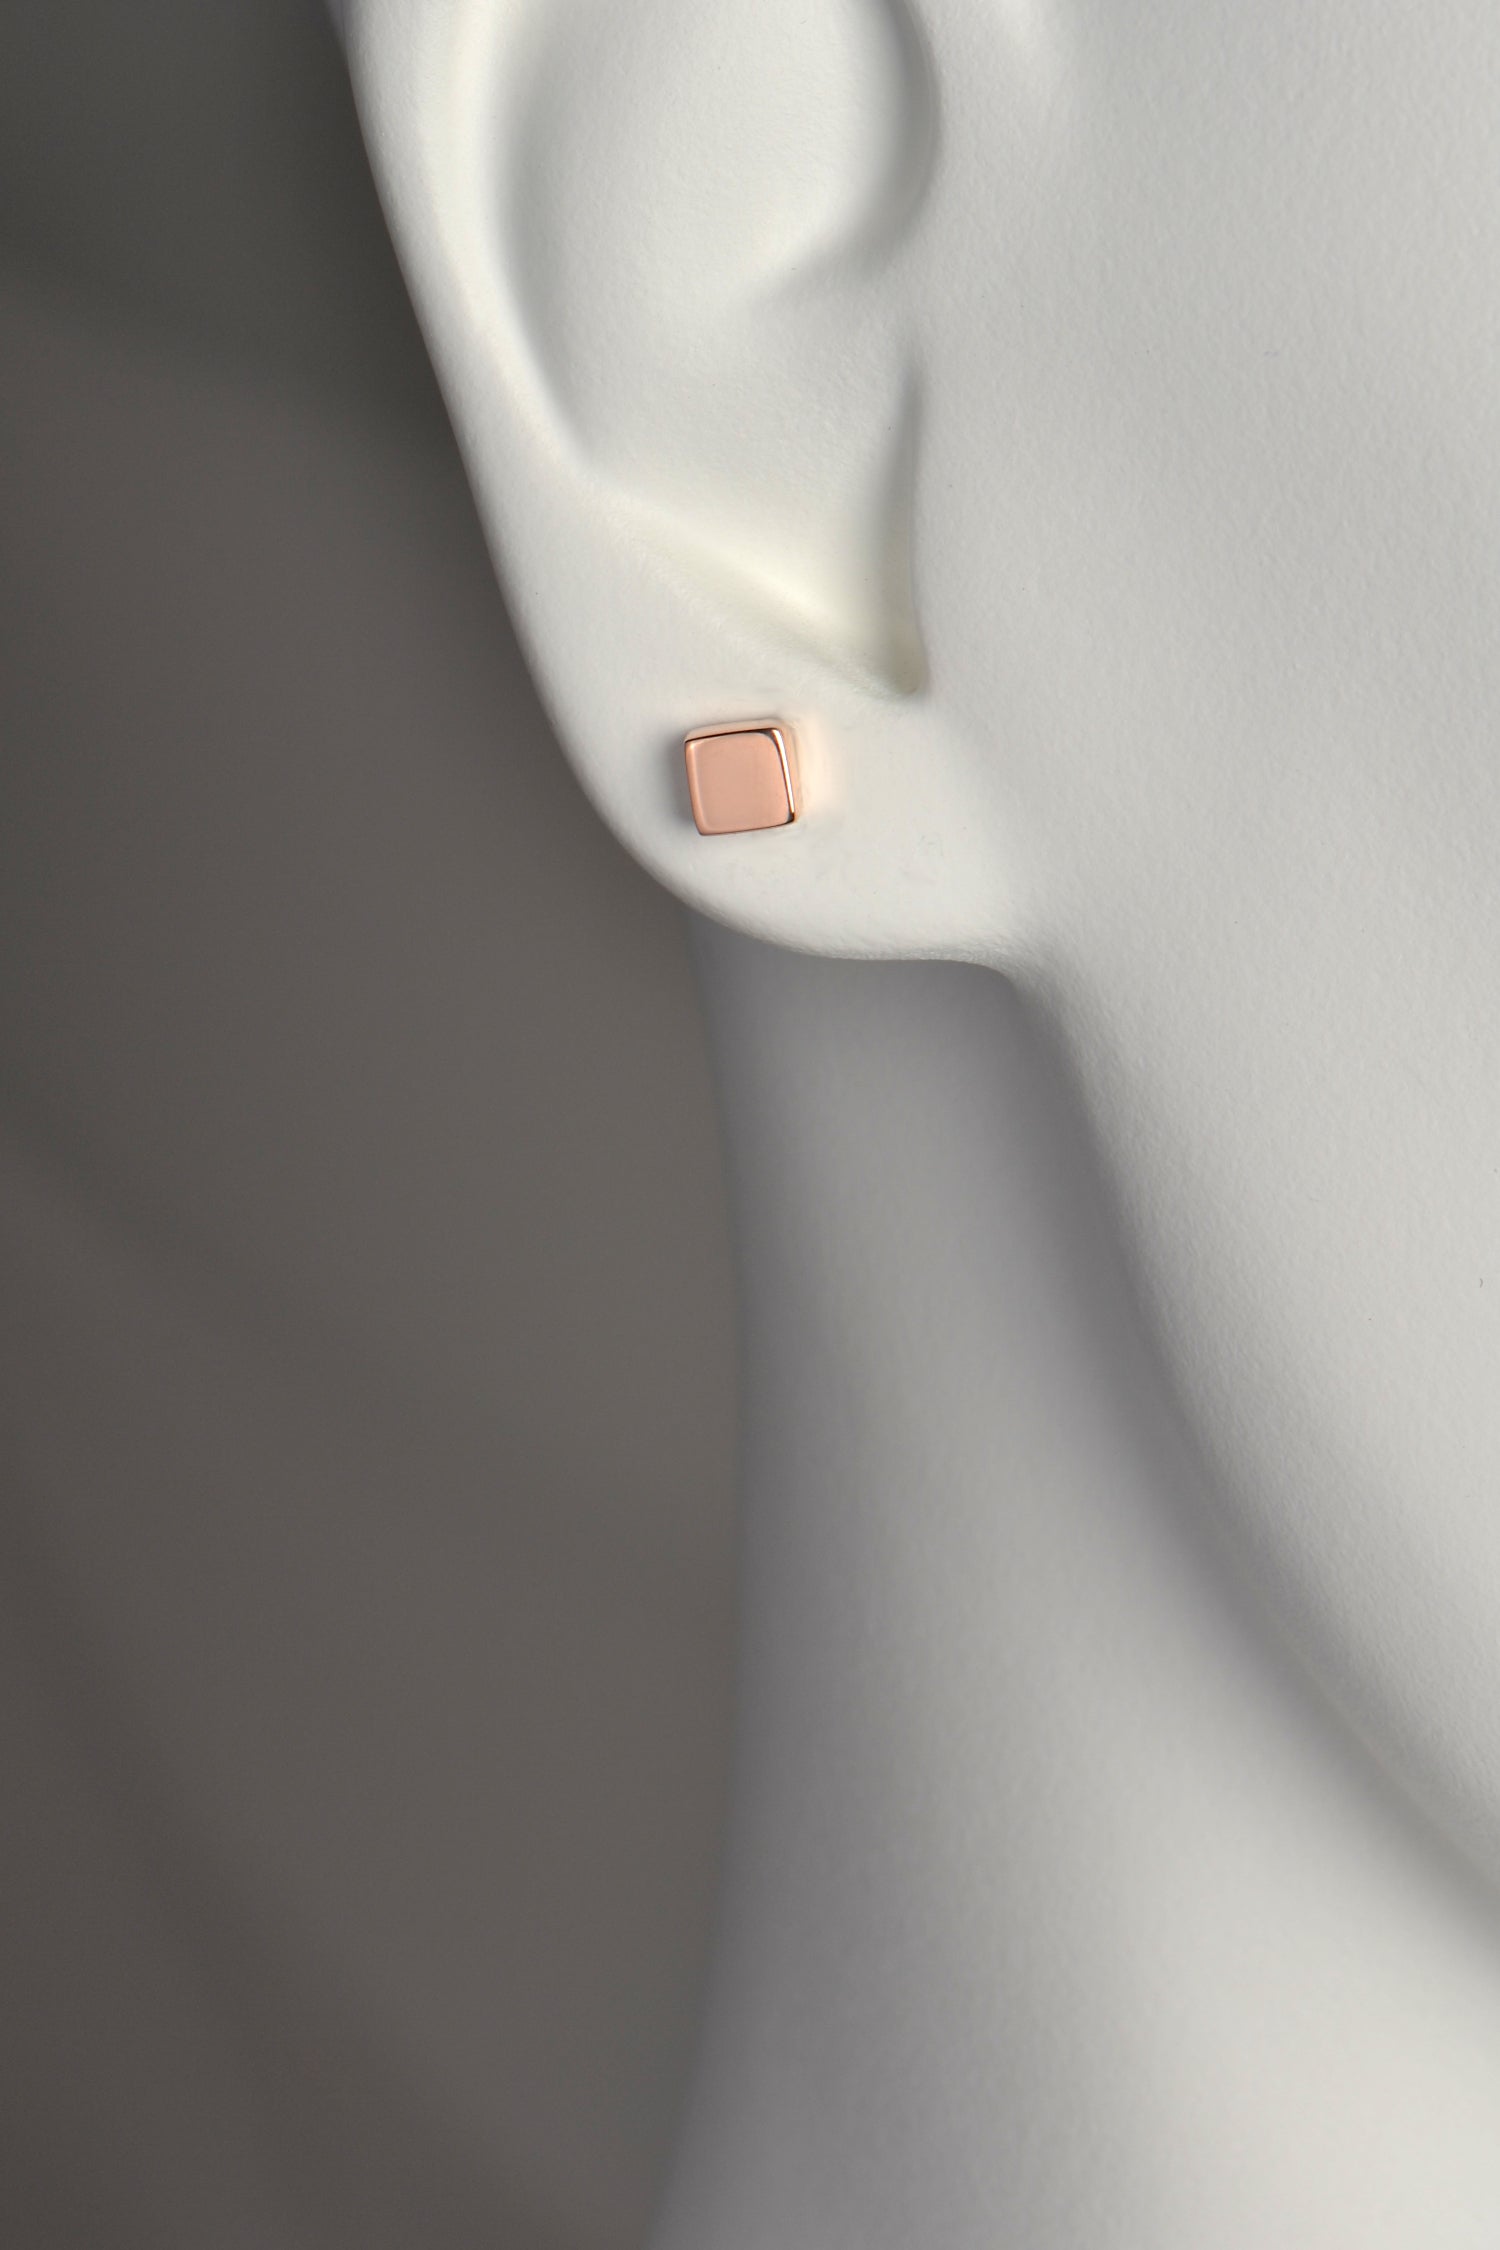 Picture of 5mm square designer earrings in an earlobe showing that they are petite and cover about half the earlobe